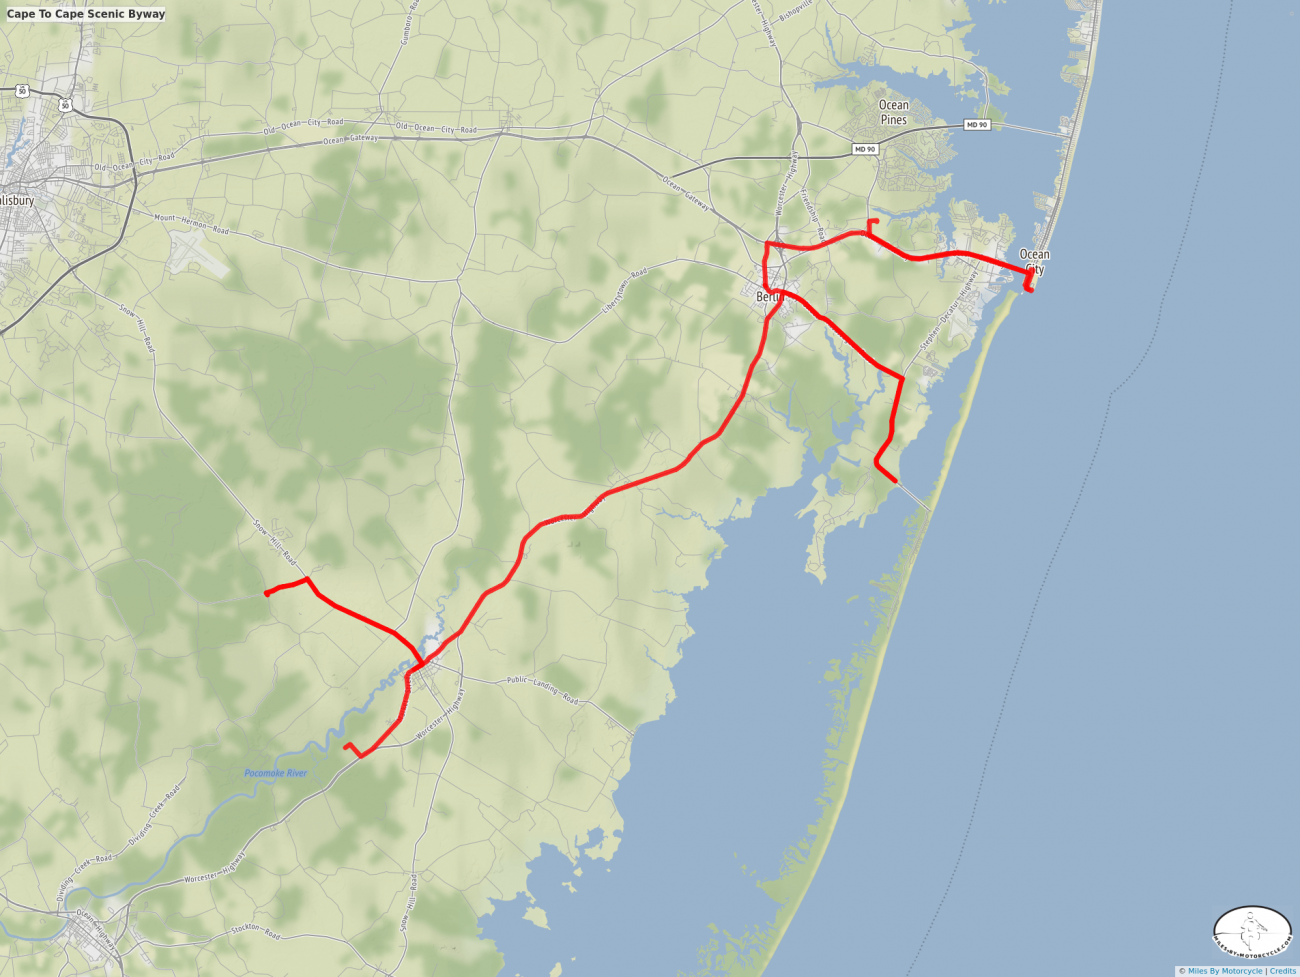 Cape To Cape Scenic Byway